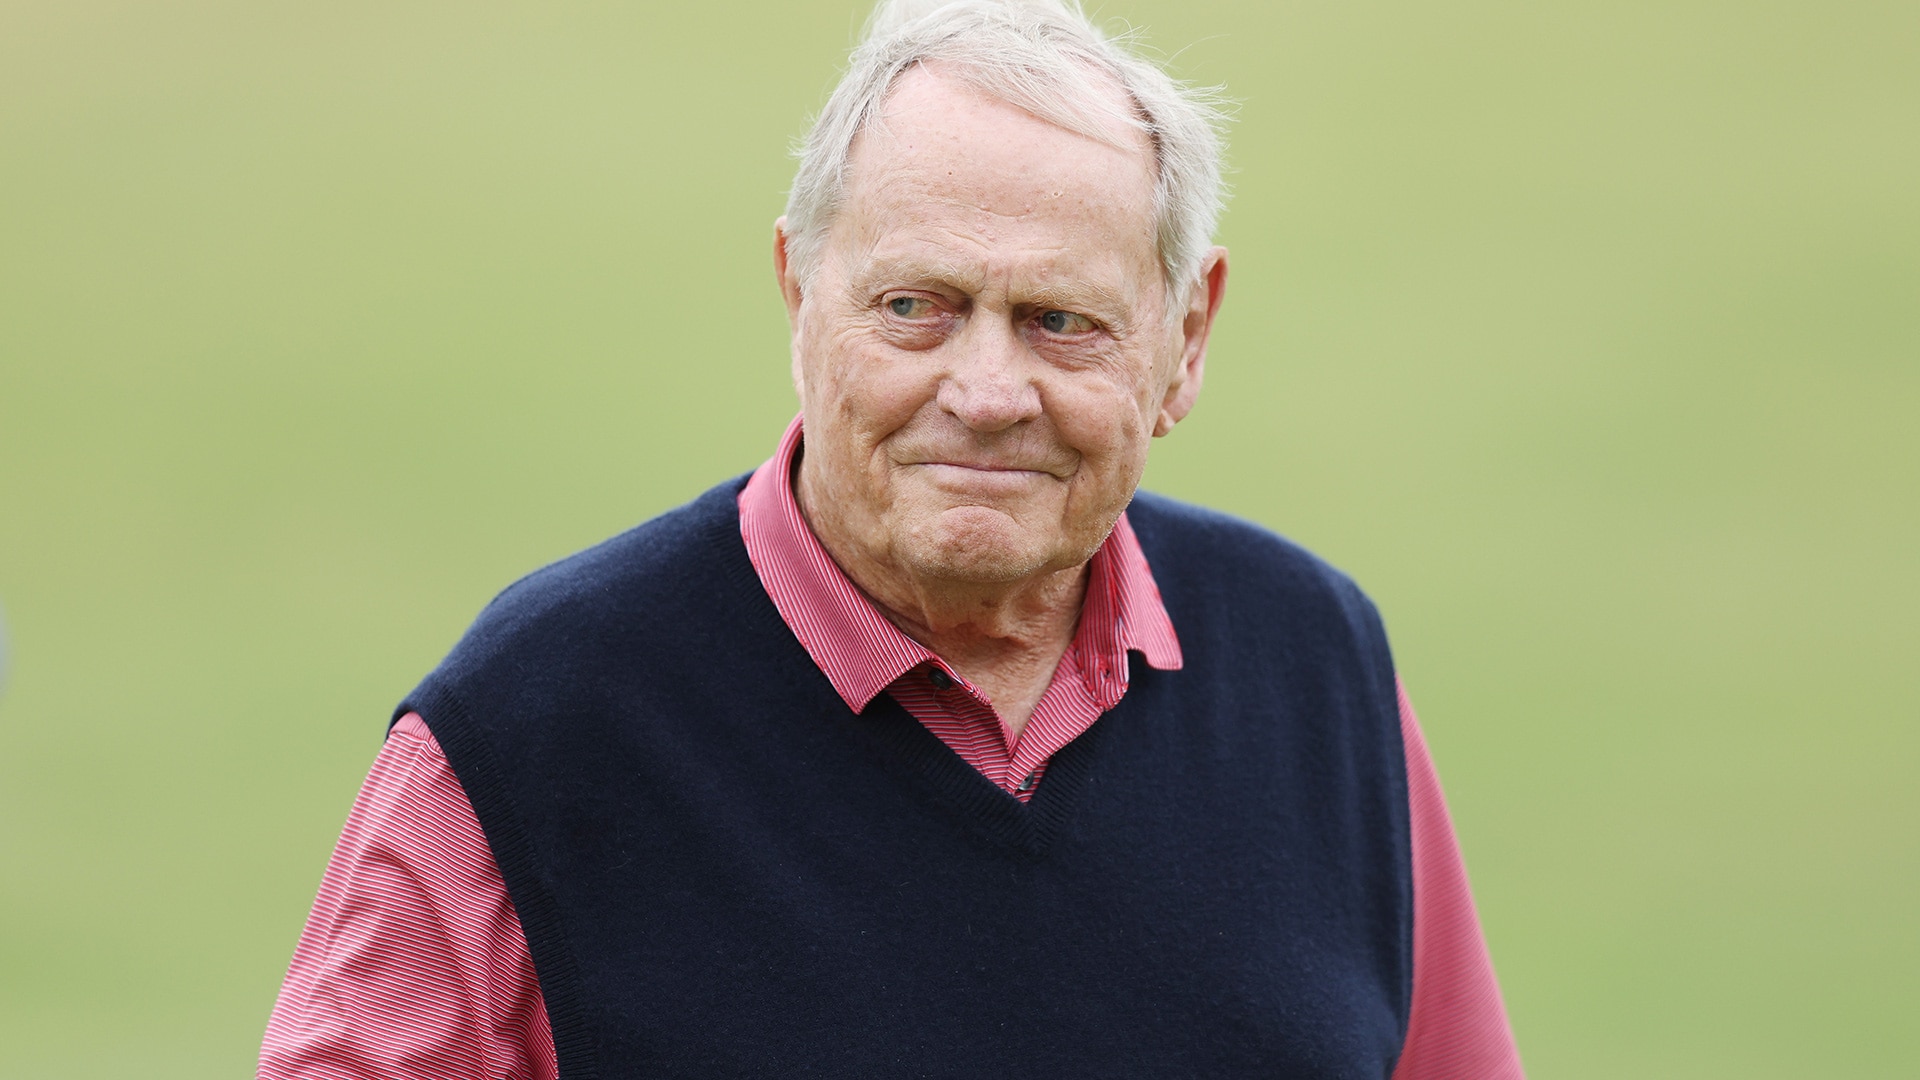 Jack Nicklaus reveals changes to ’24 PGA Tour schedule, says PGA National field stronger in ’24